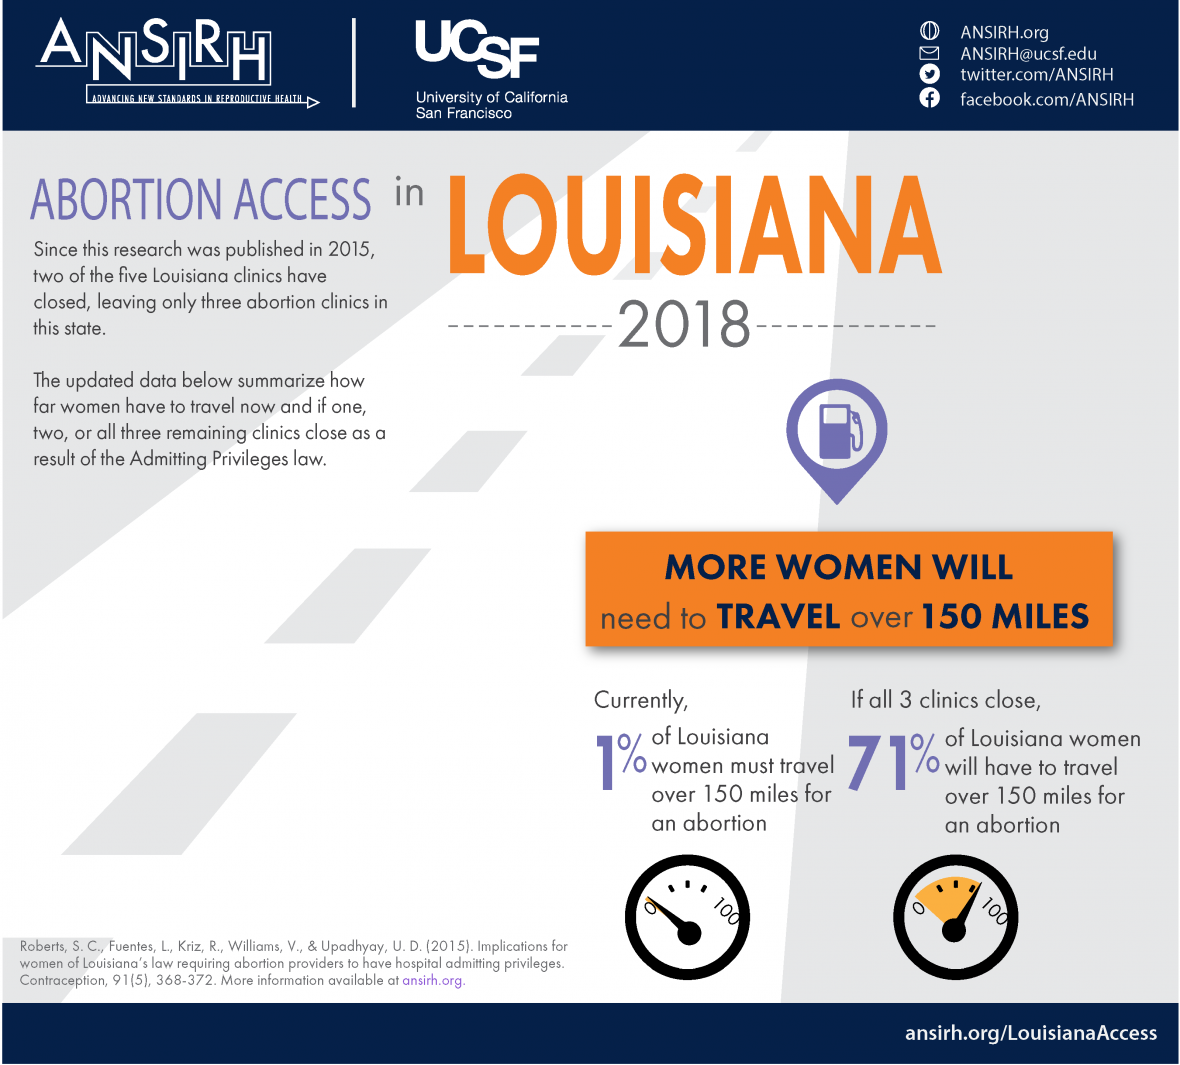 Infographic on abortion access in Louisiana